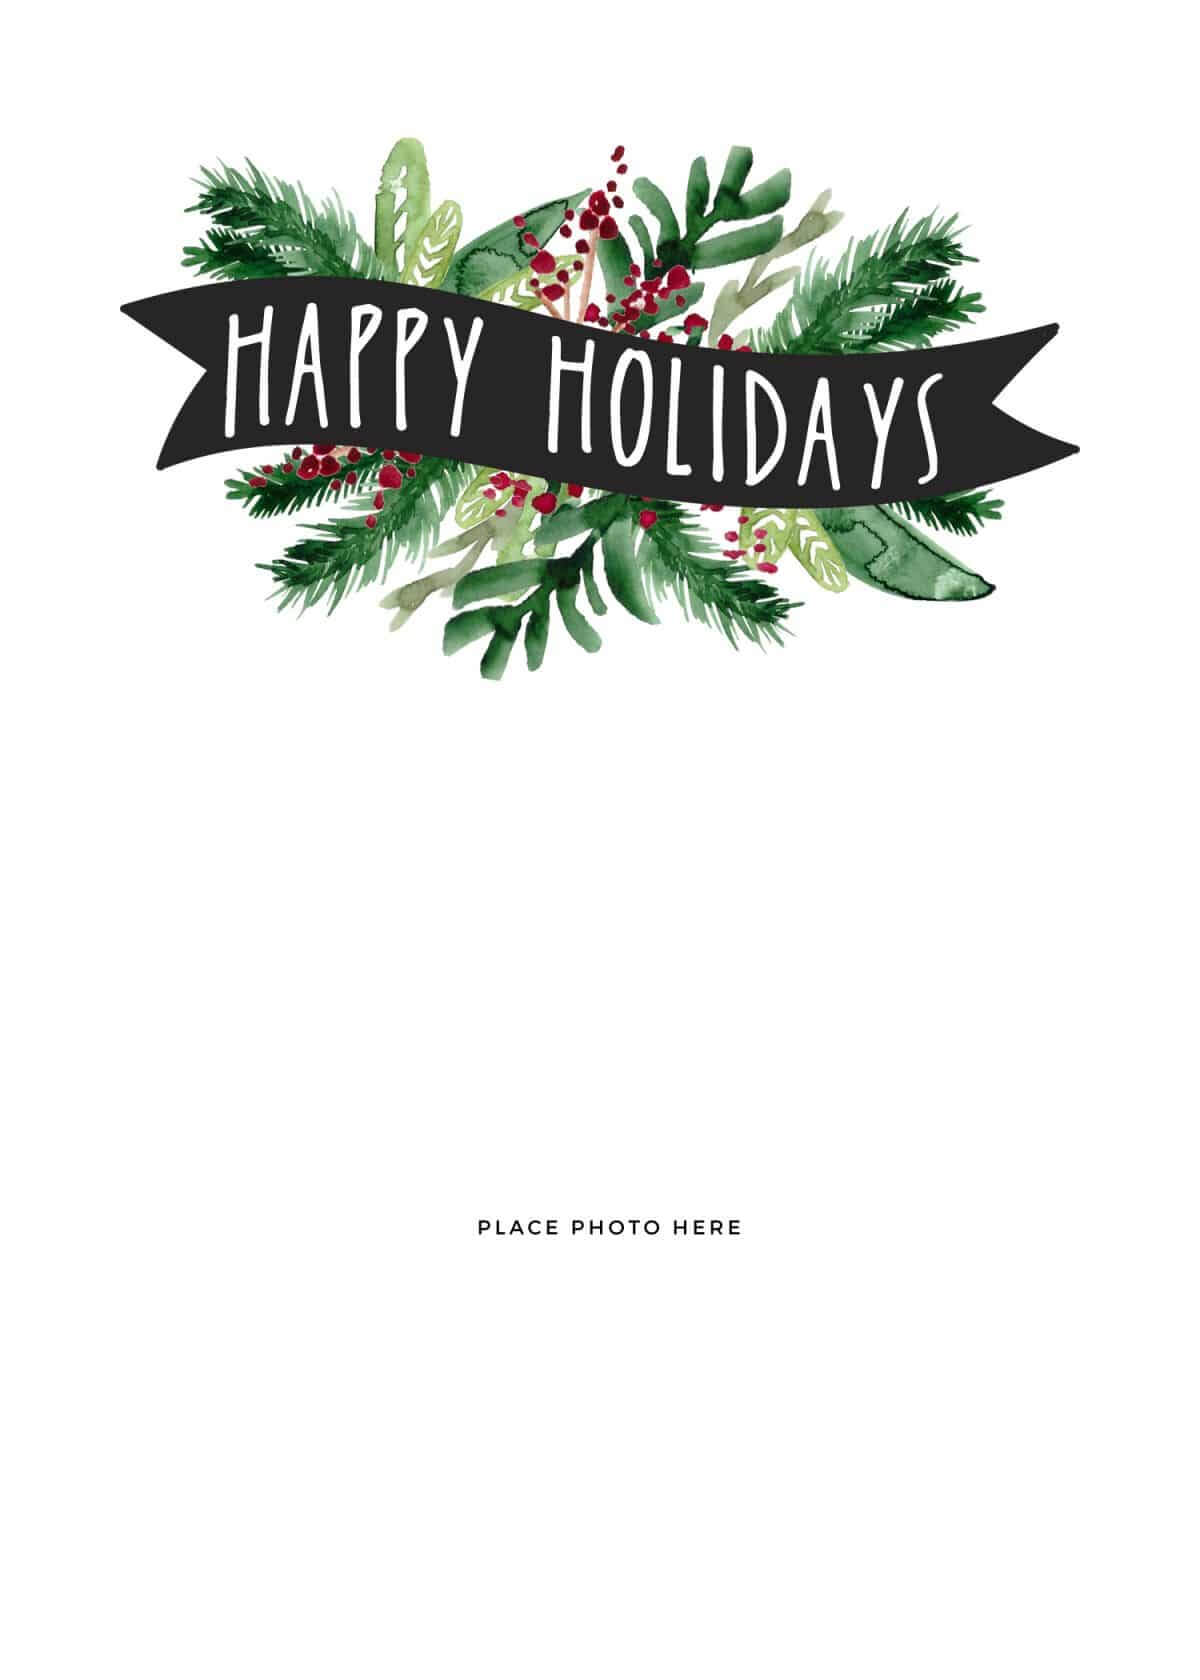 27 Free Christmas Card Template For Photos In Photoshop With Regard To Happy Holidays Card Template